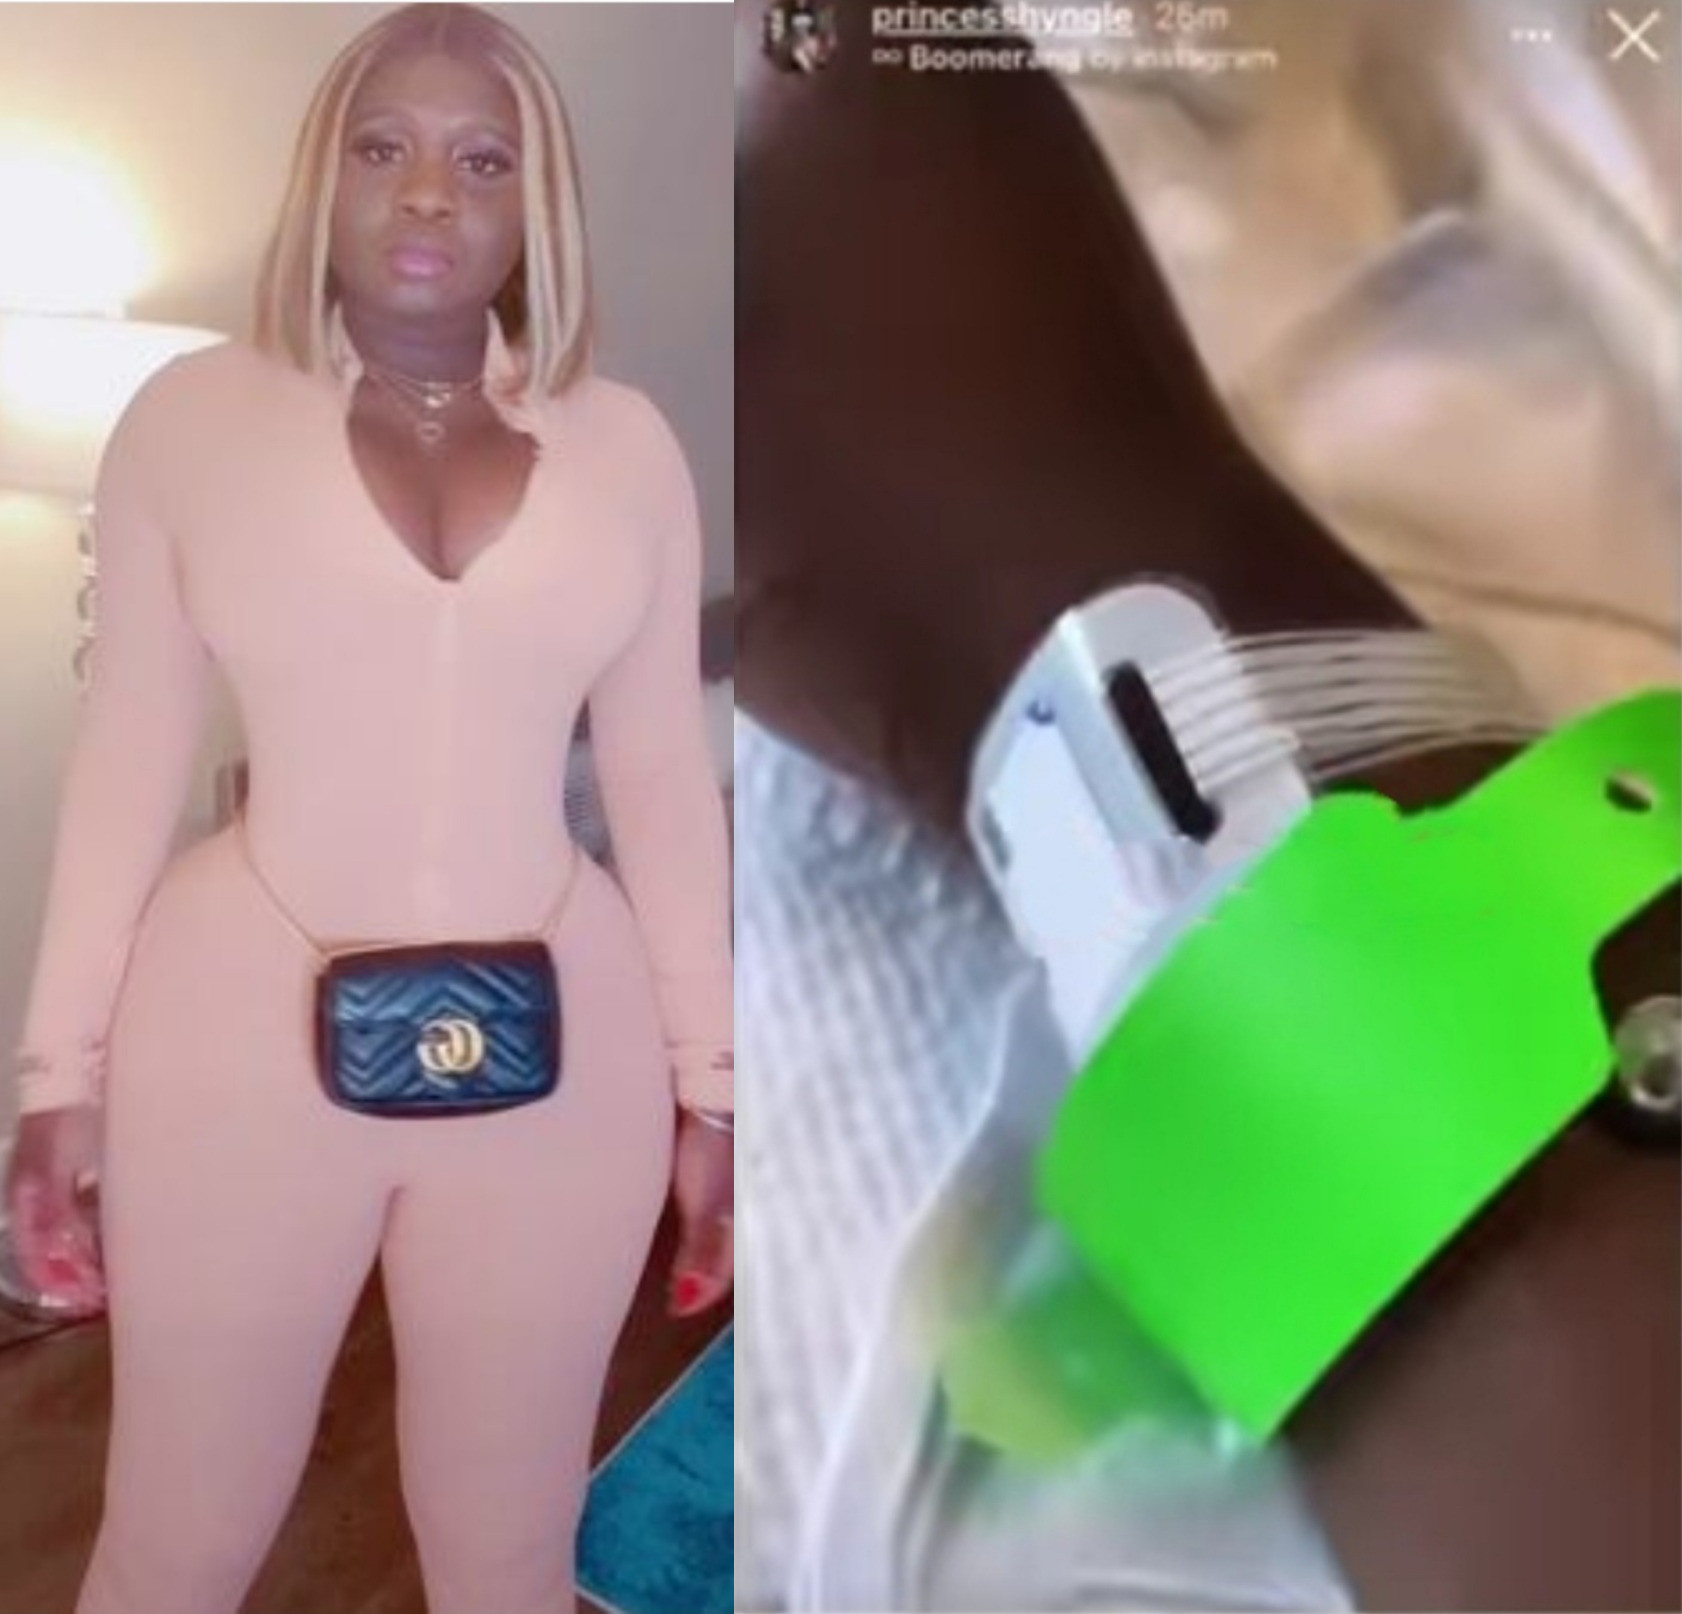 Princess Shyngle rushed to hospital in an ambulance after attempting suicide again